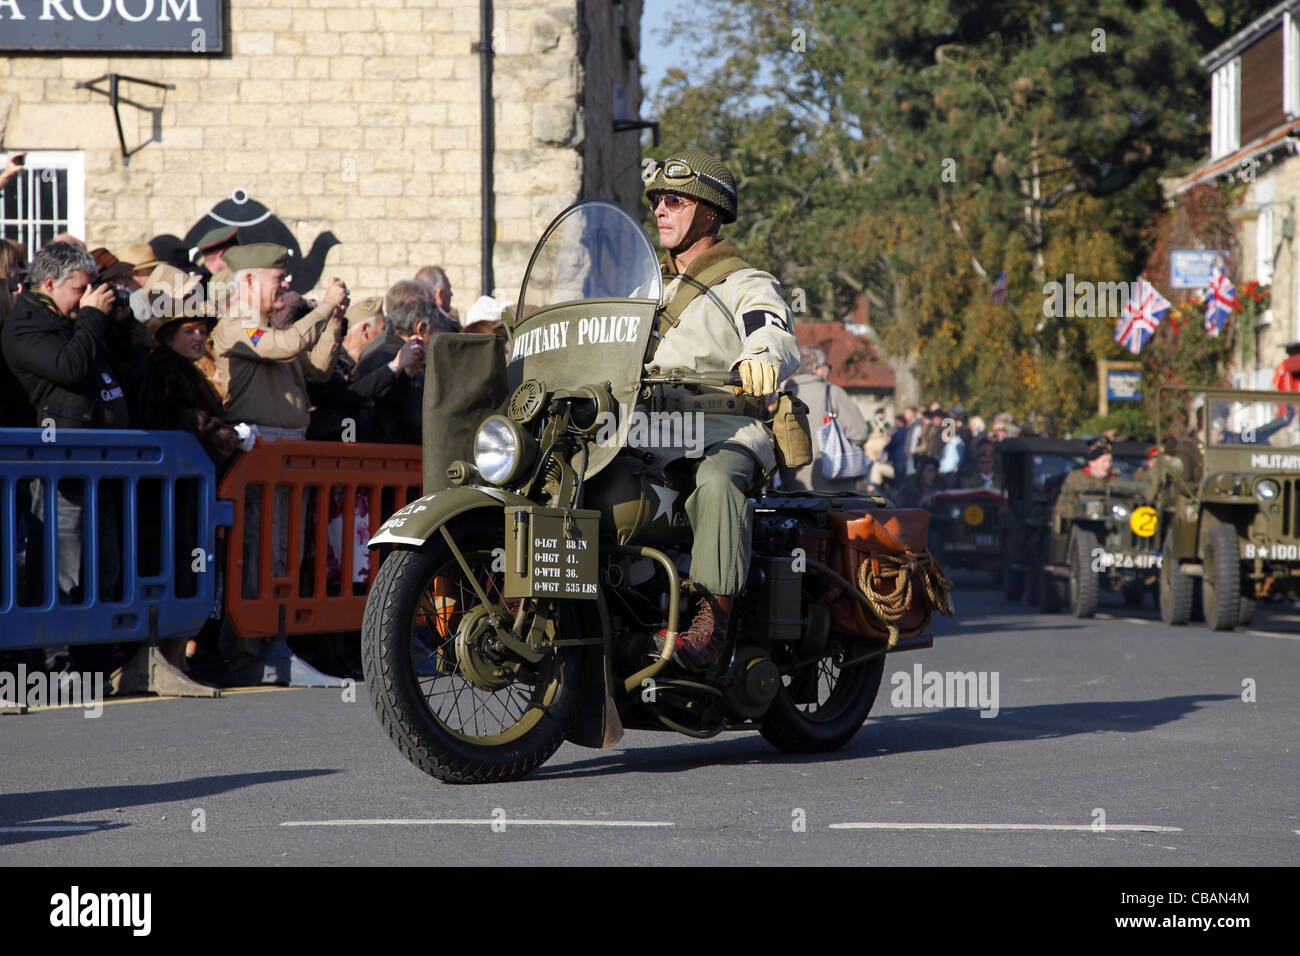 US MILITARY POLICE MOTORCYCLE PICKERING NORTH YORKSHIRE 15 October 2011 Stock Photo